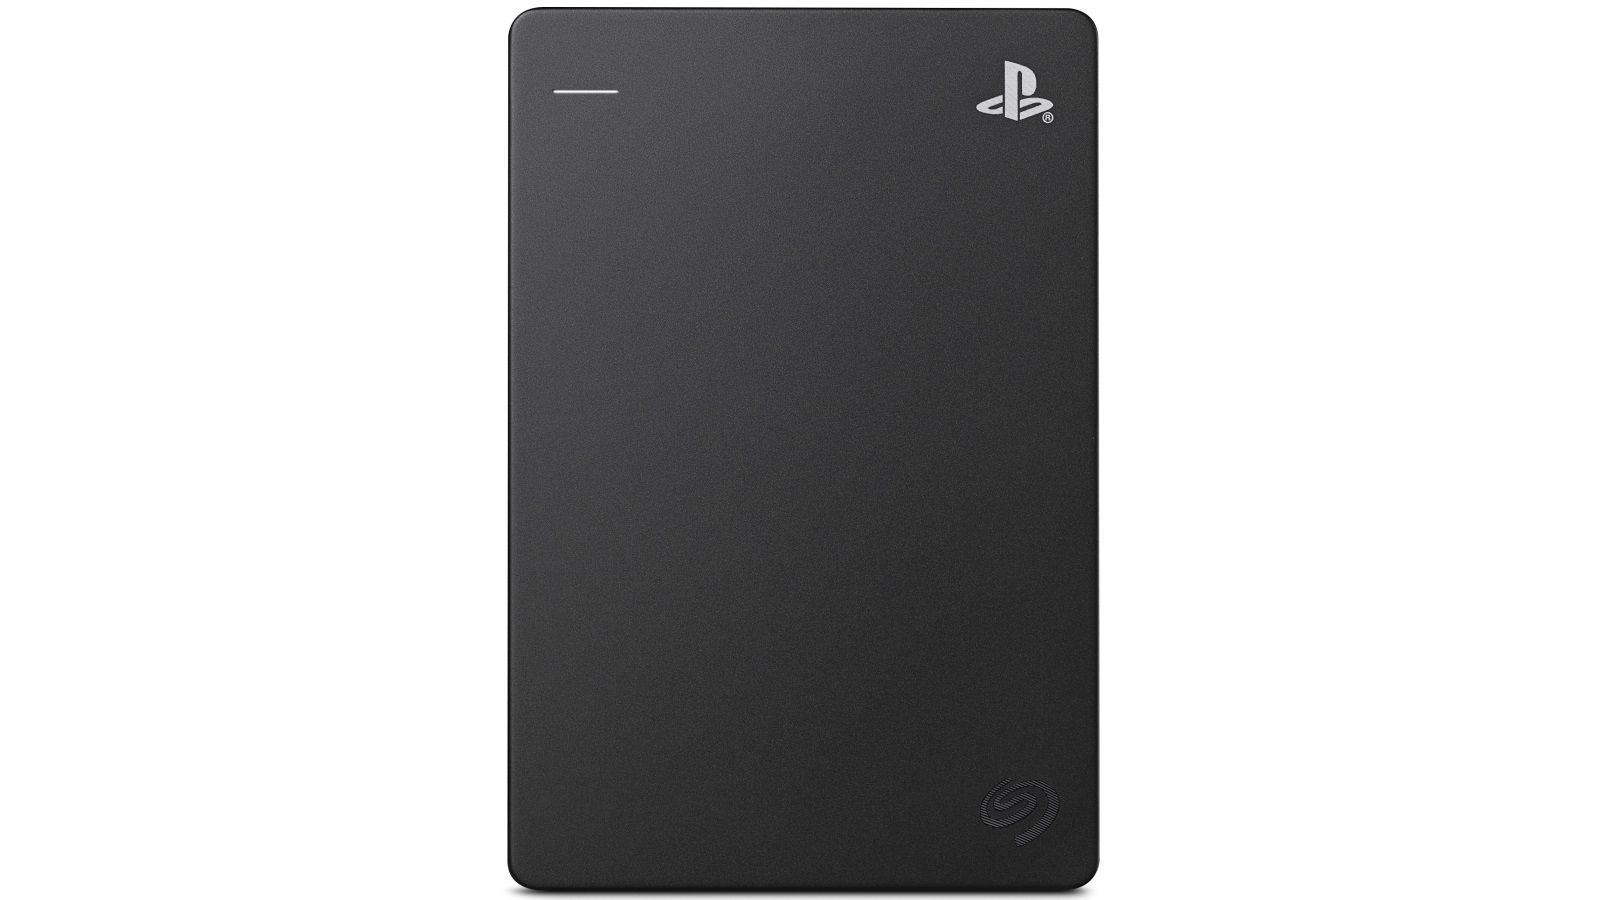 ps4 supported external hard drives